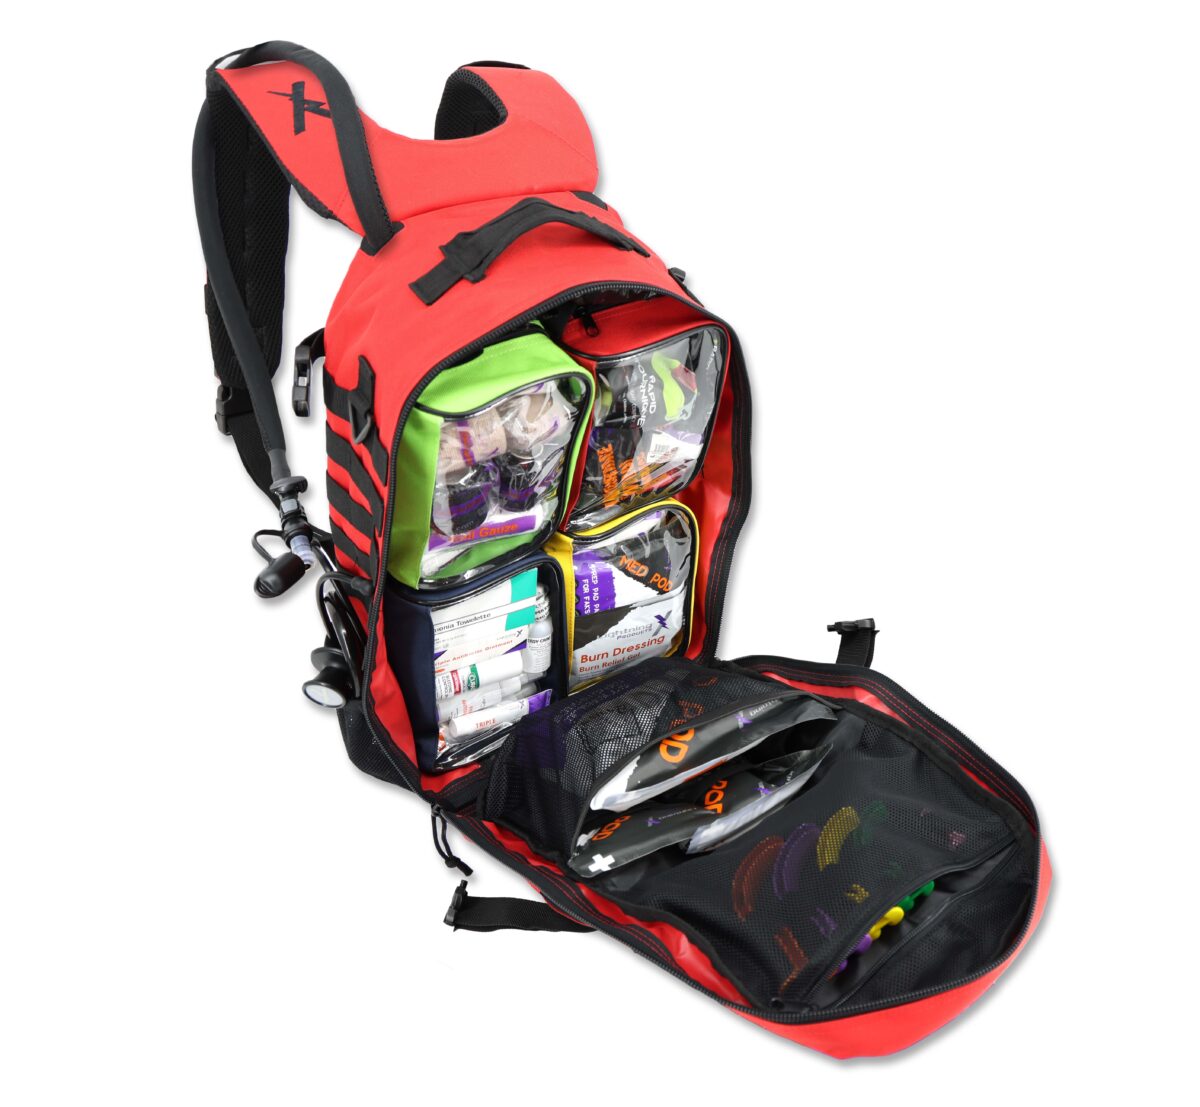 Lightning X premium tacmed molle trauma backpack kit fully stocked gear bag for ems emt first responder w/ first aid supplies including quikclot, tourniquet, israeli bandage, nasal airways and professional medical supplies with removable colored organizer pouches and hydration bladder - RED